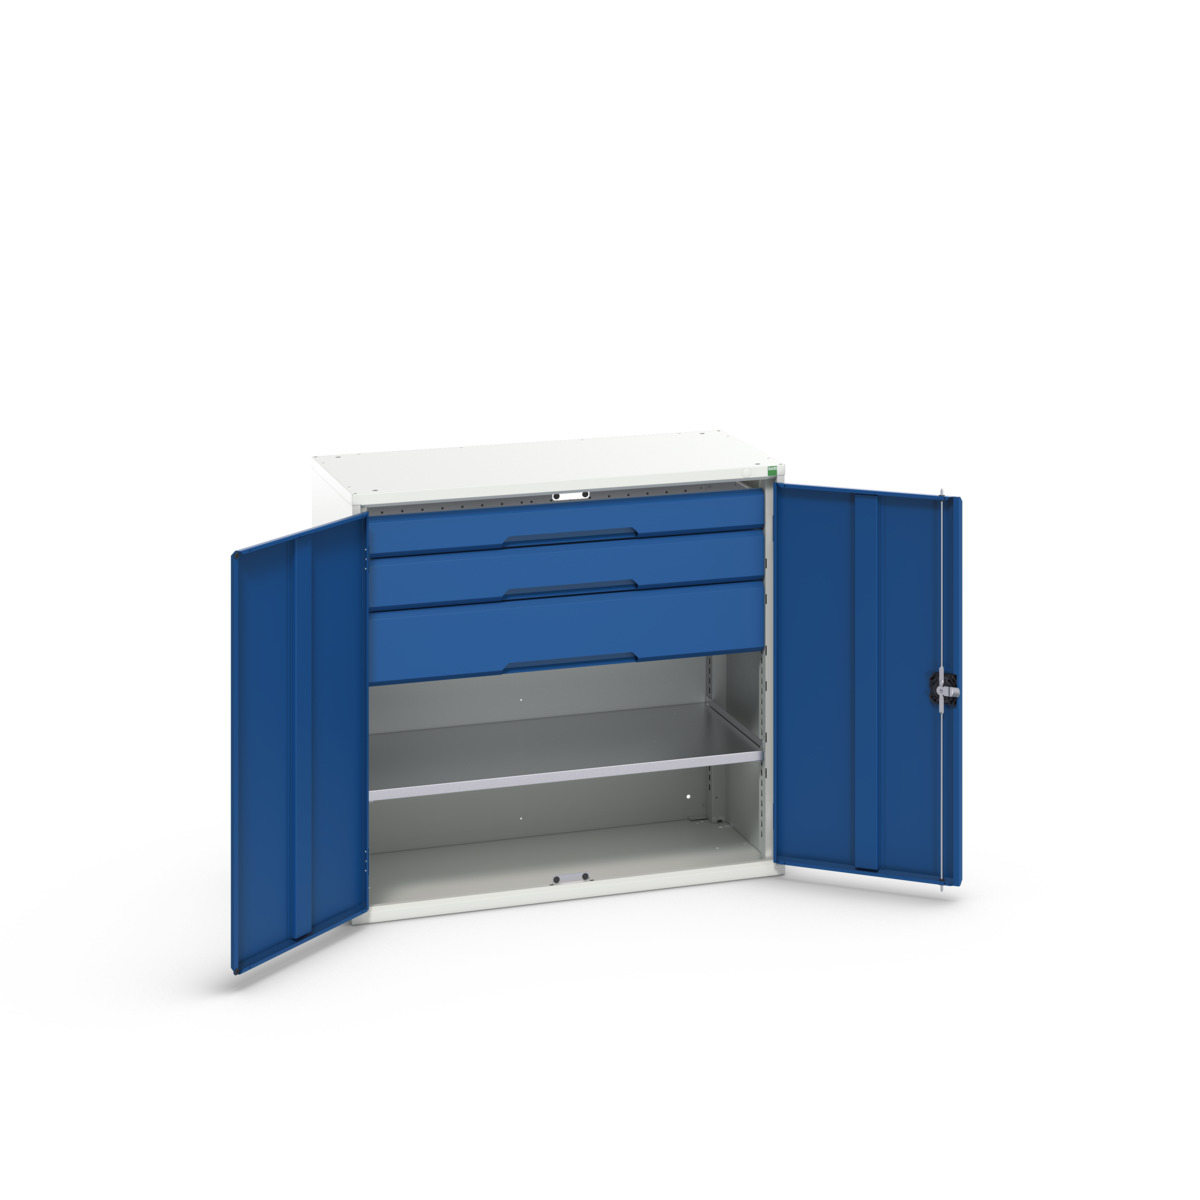 16926554.11 - verso kitted cupboard